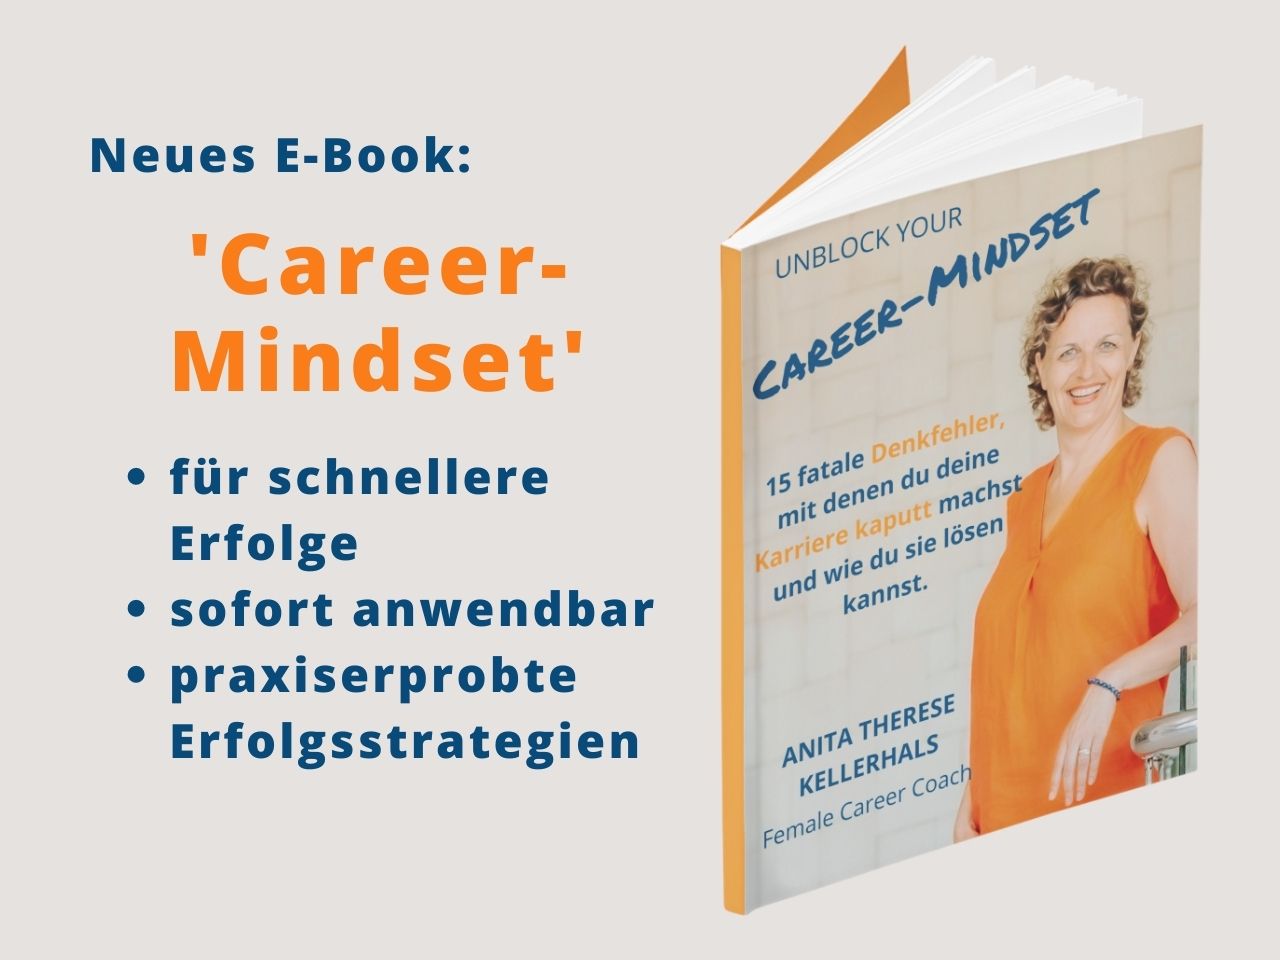 E-Book - Career Mindset, Kellerhals Consulting - Coaching. Training.